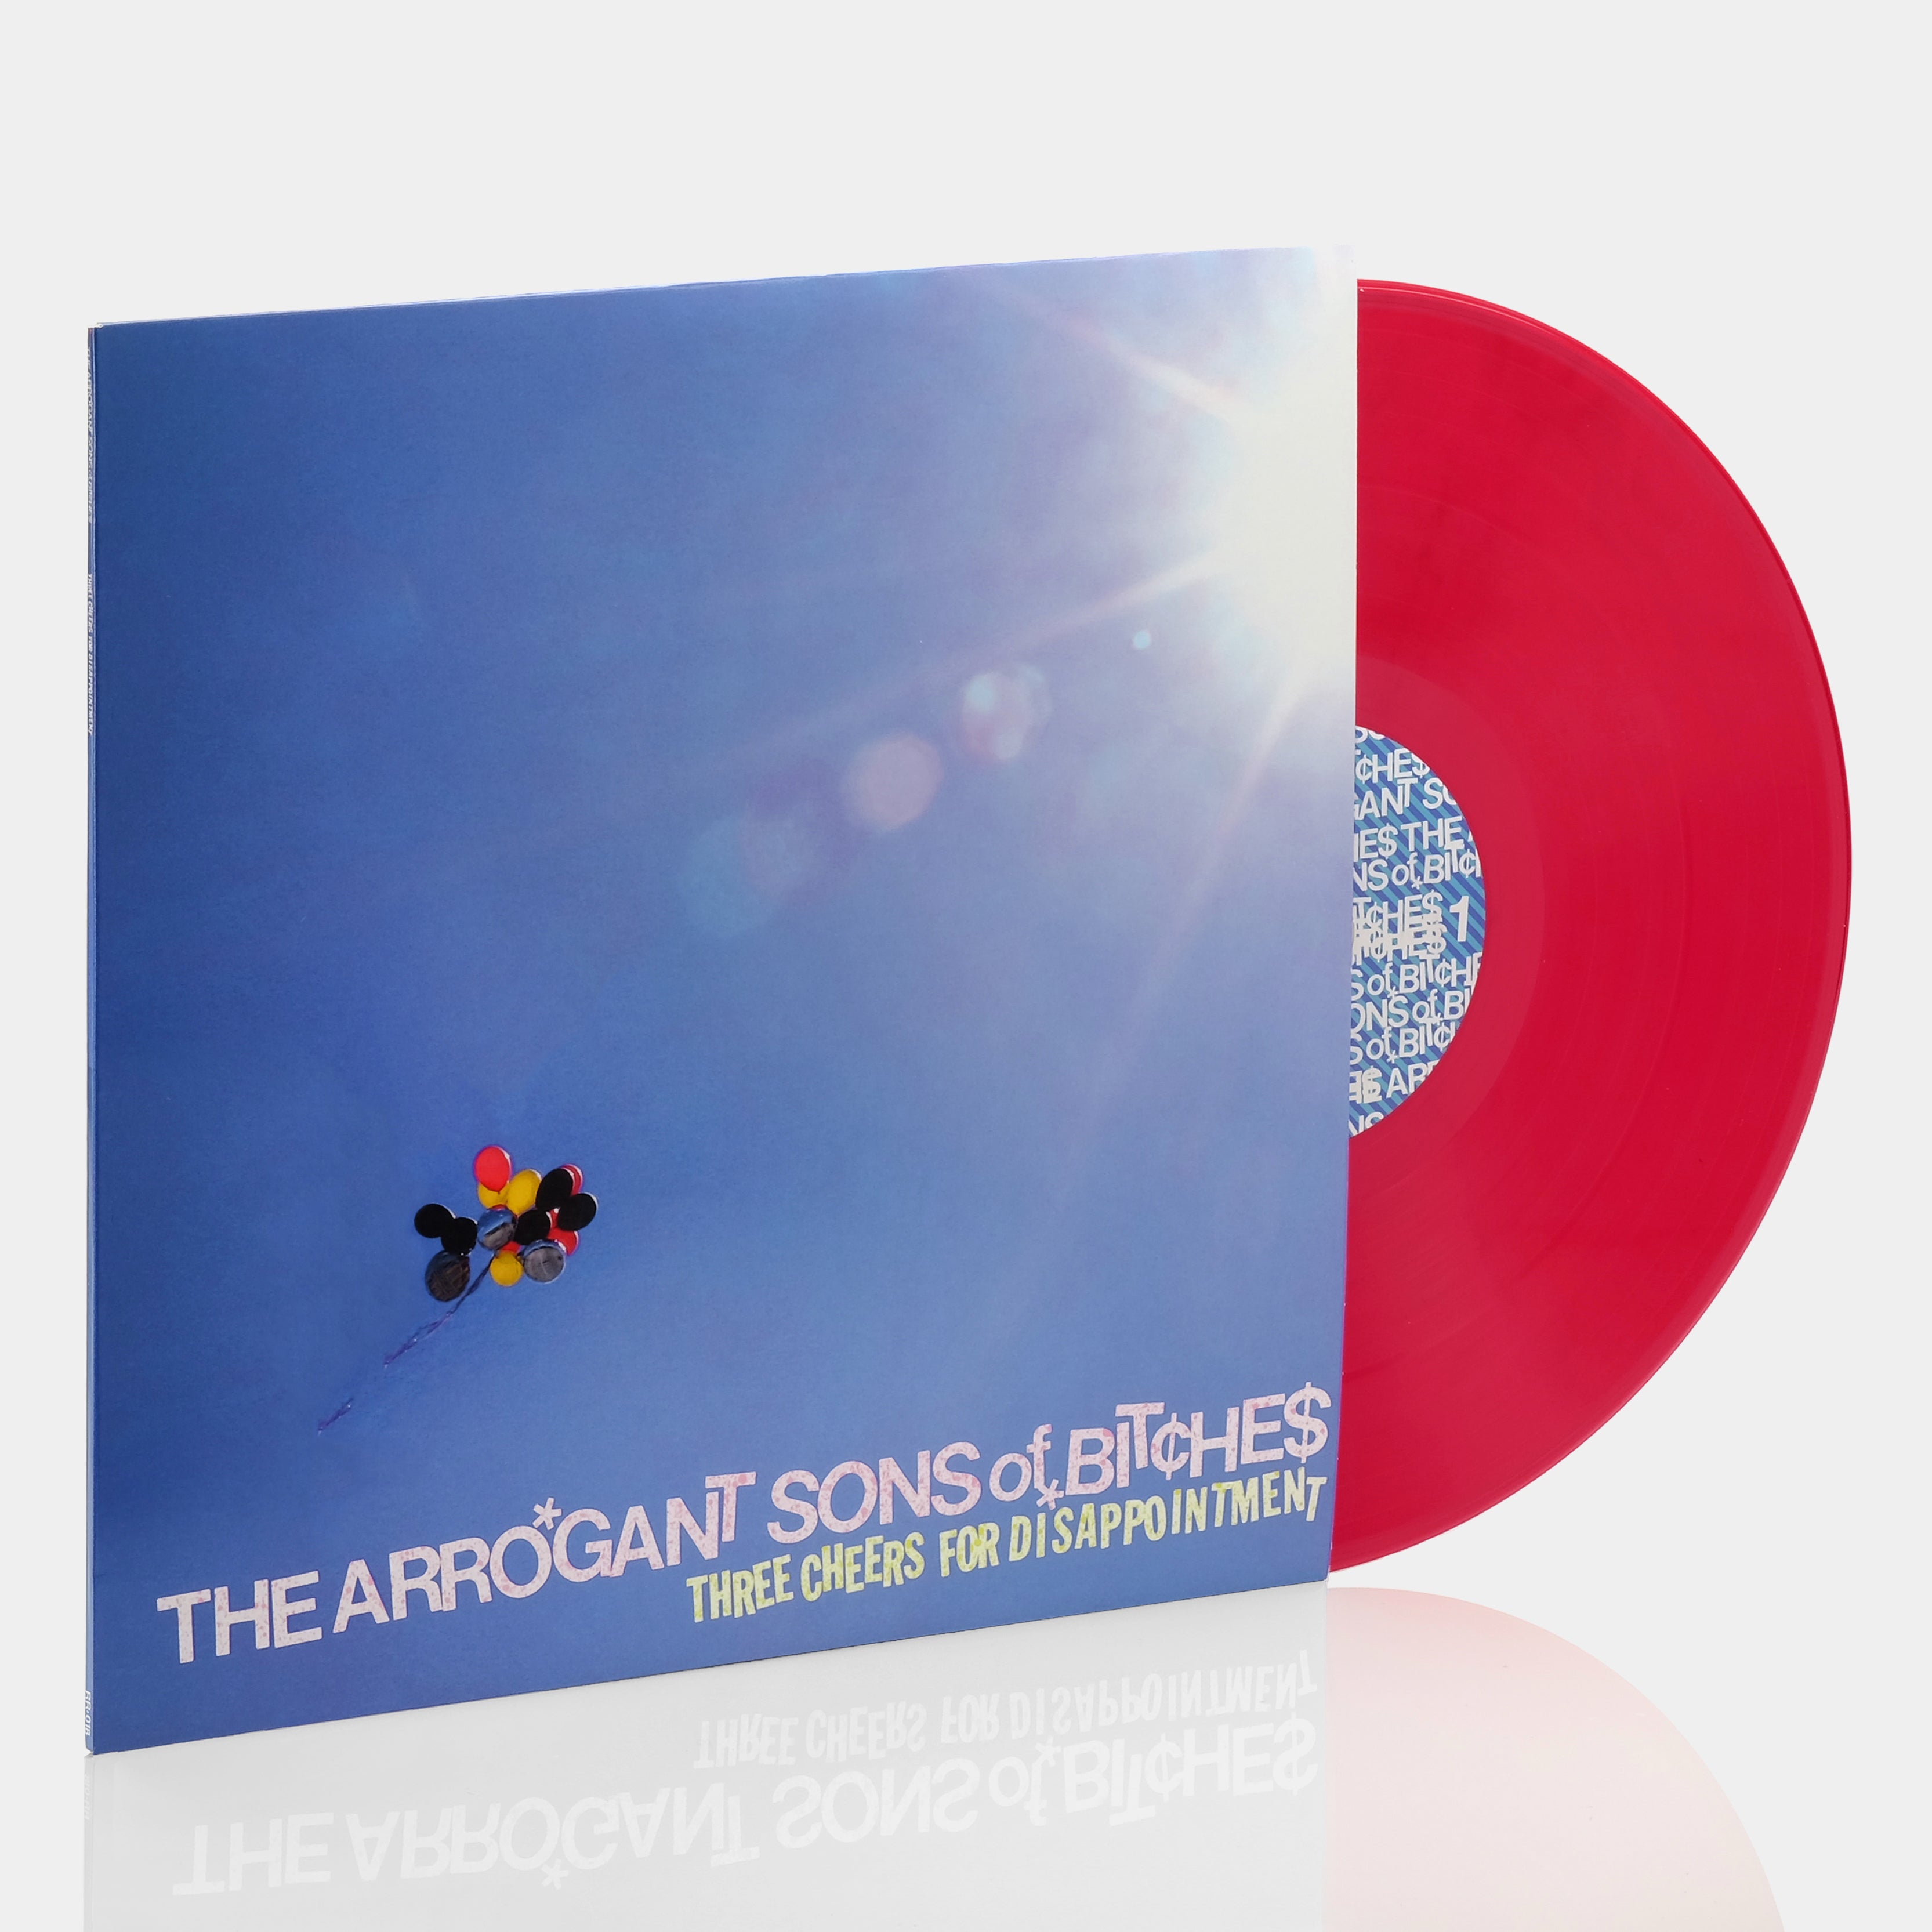 The Arrogant Sons Of Bitches - Three Cheers For Disappointment LP Red Vinyl Record